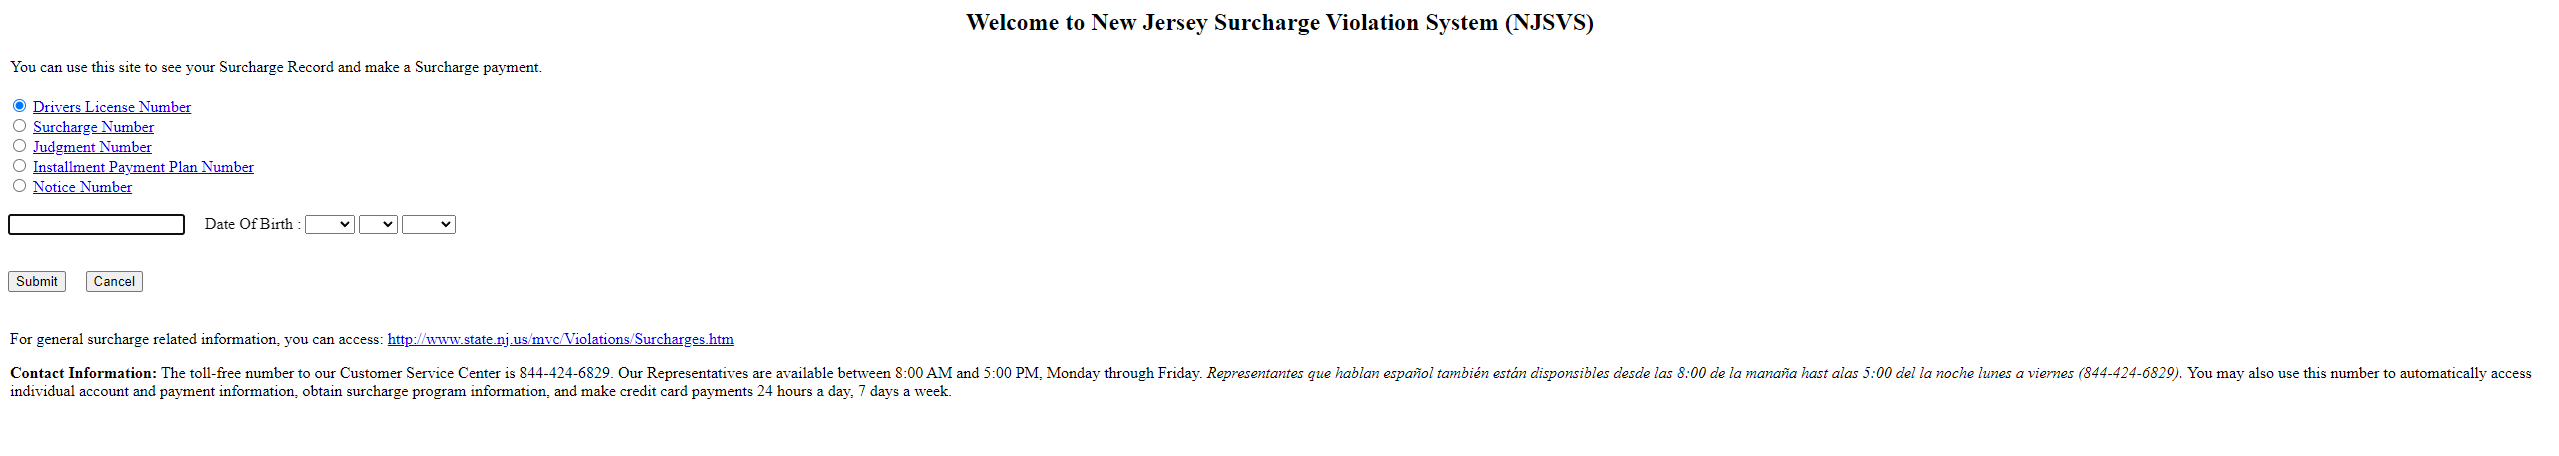 NJ Surcharge Payment Online at www.njsurcharge.com